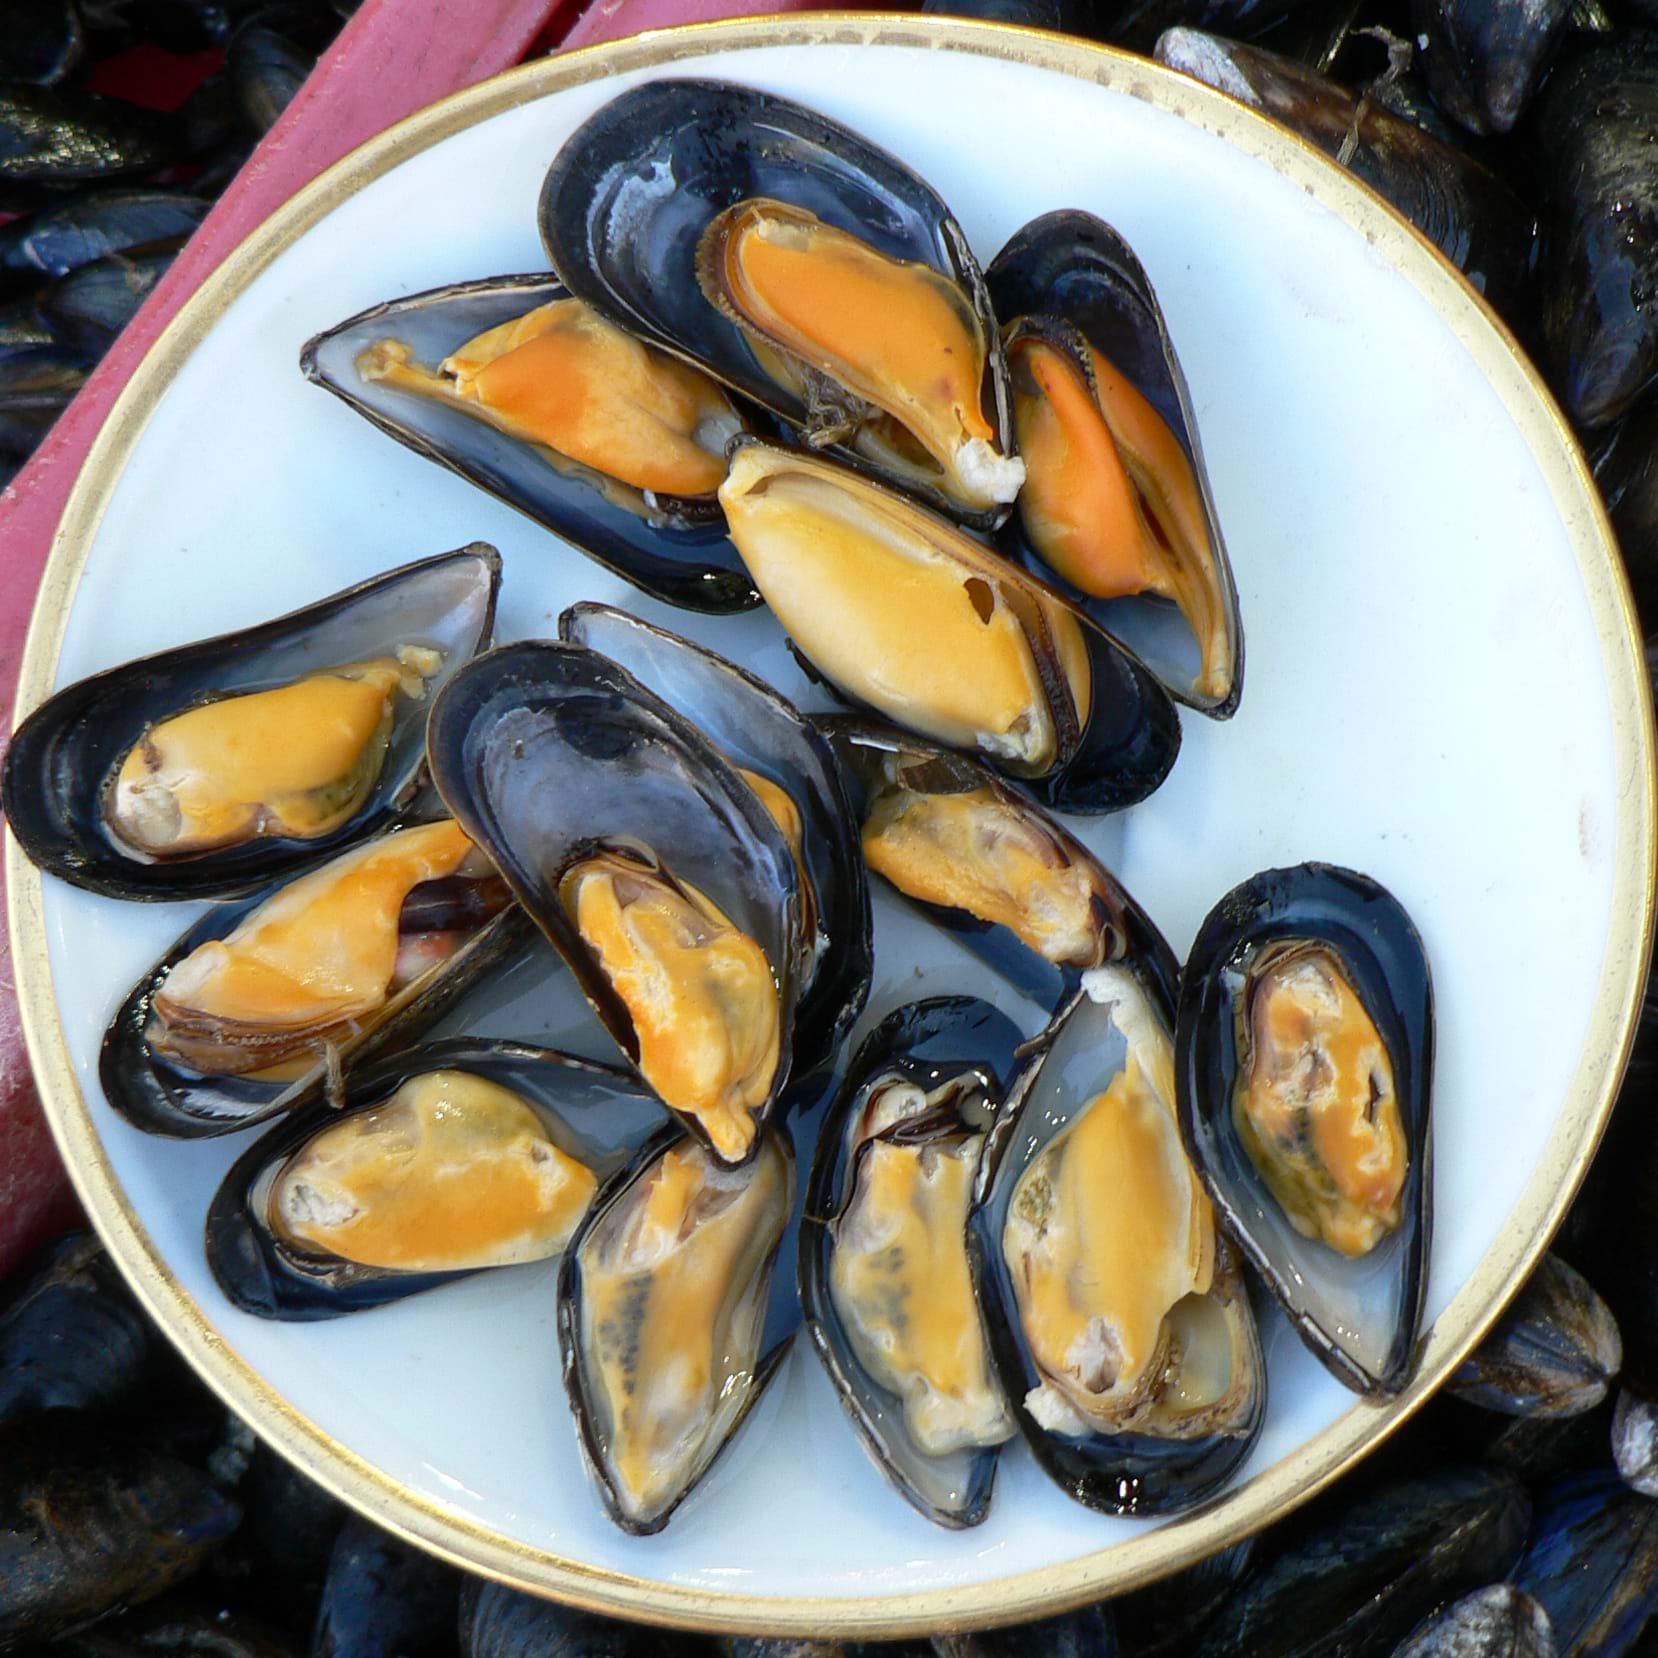 Image of cooked mussels on a plate